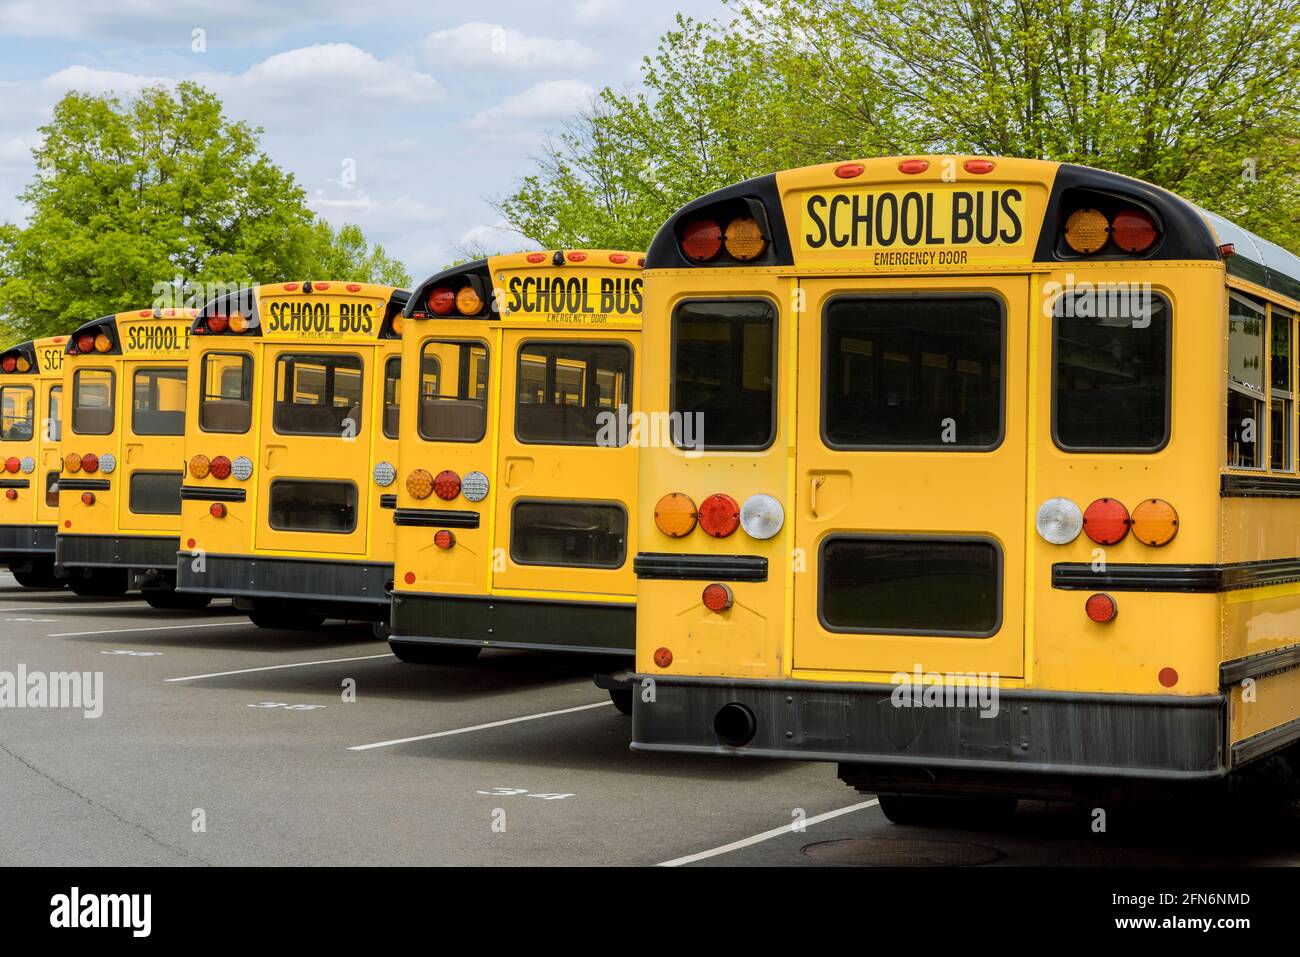 Yellow school bus for children educational transport on the street Stock Photo